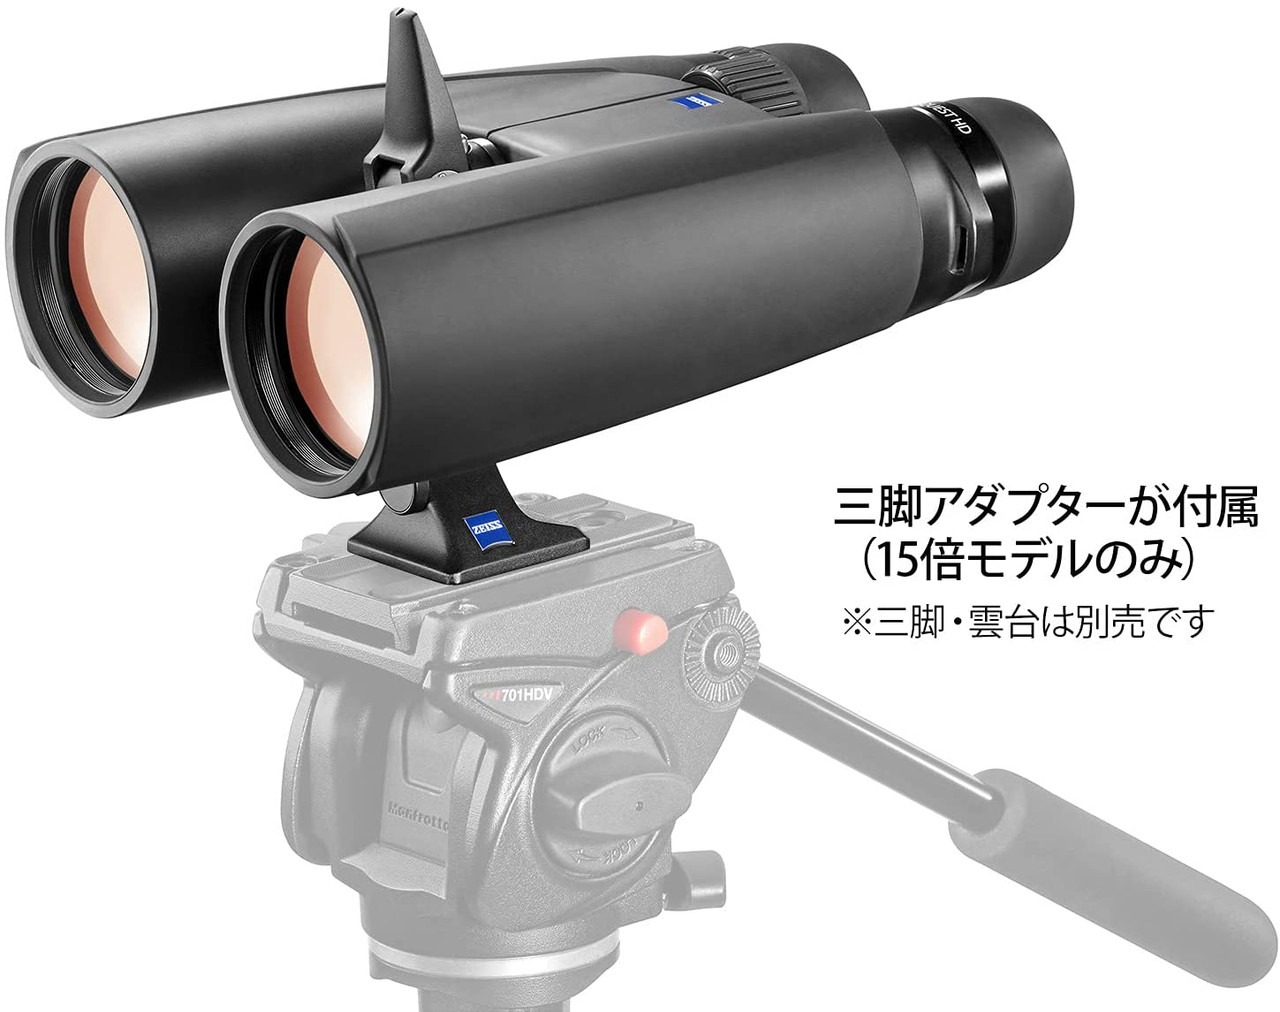 ZEISS Binoculars Conquest 15×56 Dach Prism HD Lens WIDE Angle Waterproof 653313 
* Tripod and head are not included.